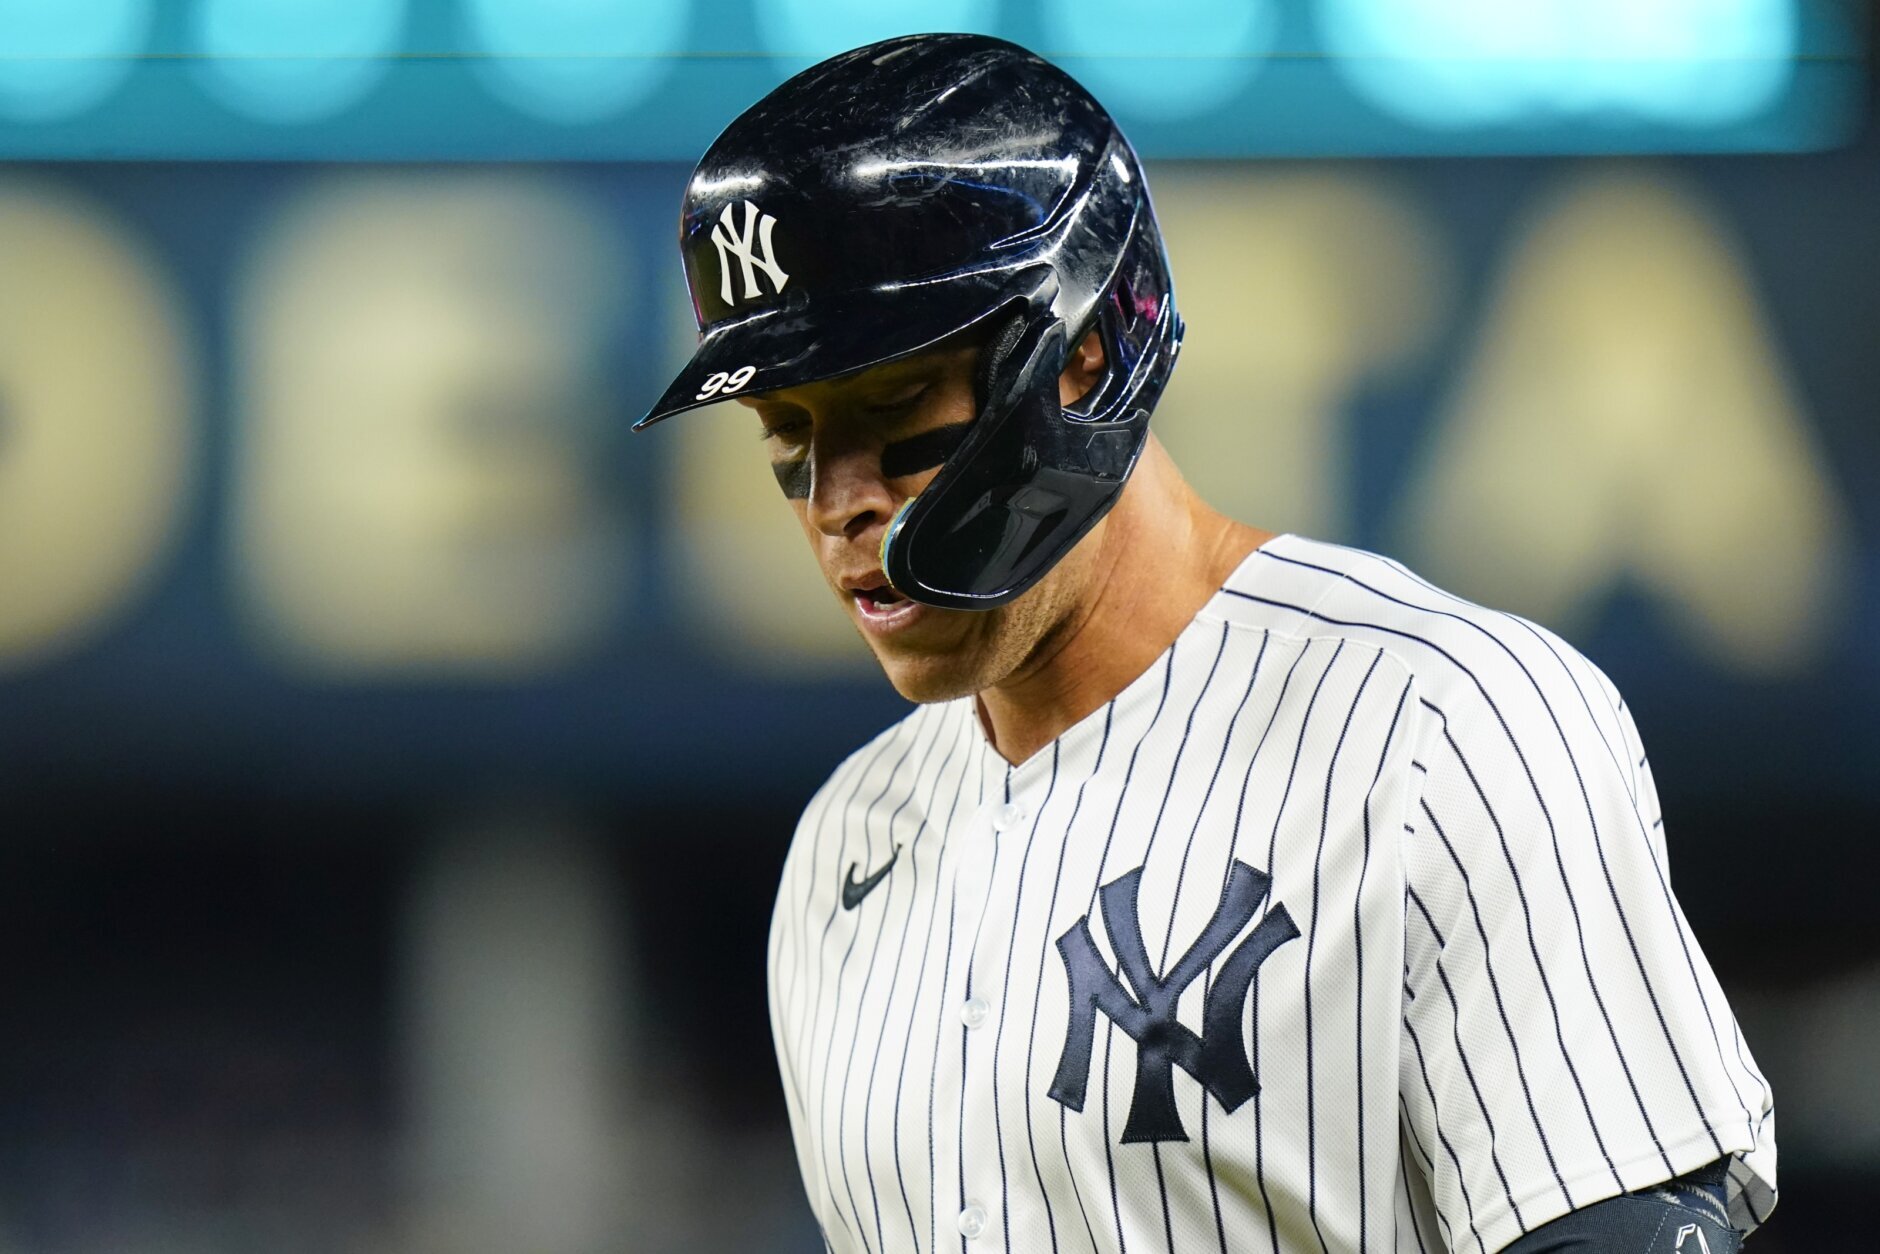 Emotional Trevino delivers for Yanks on late dad's birthday – KGET 17